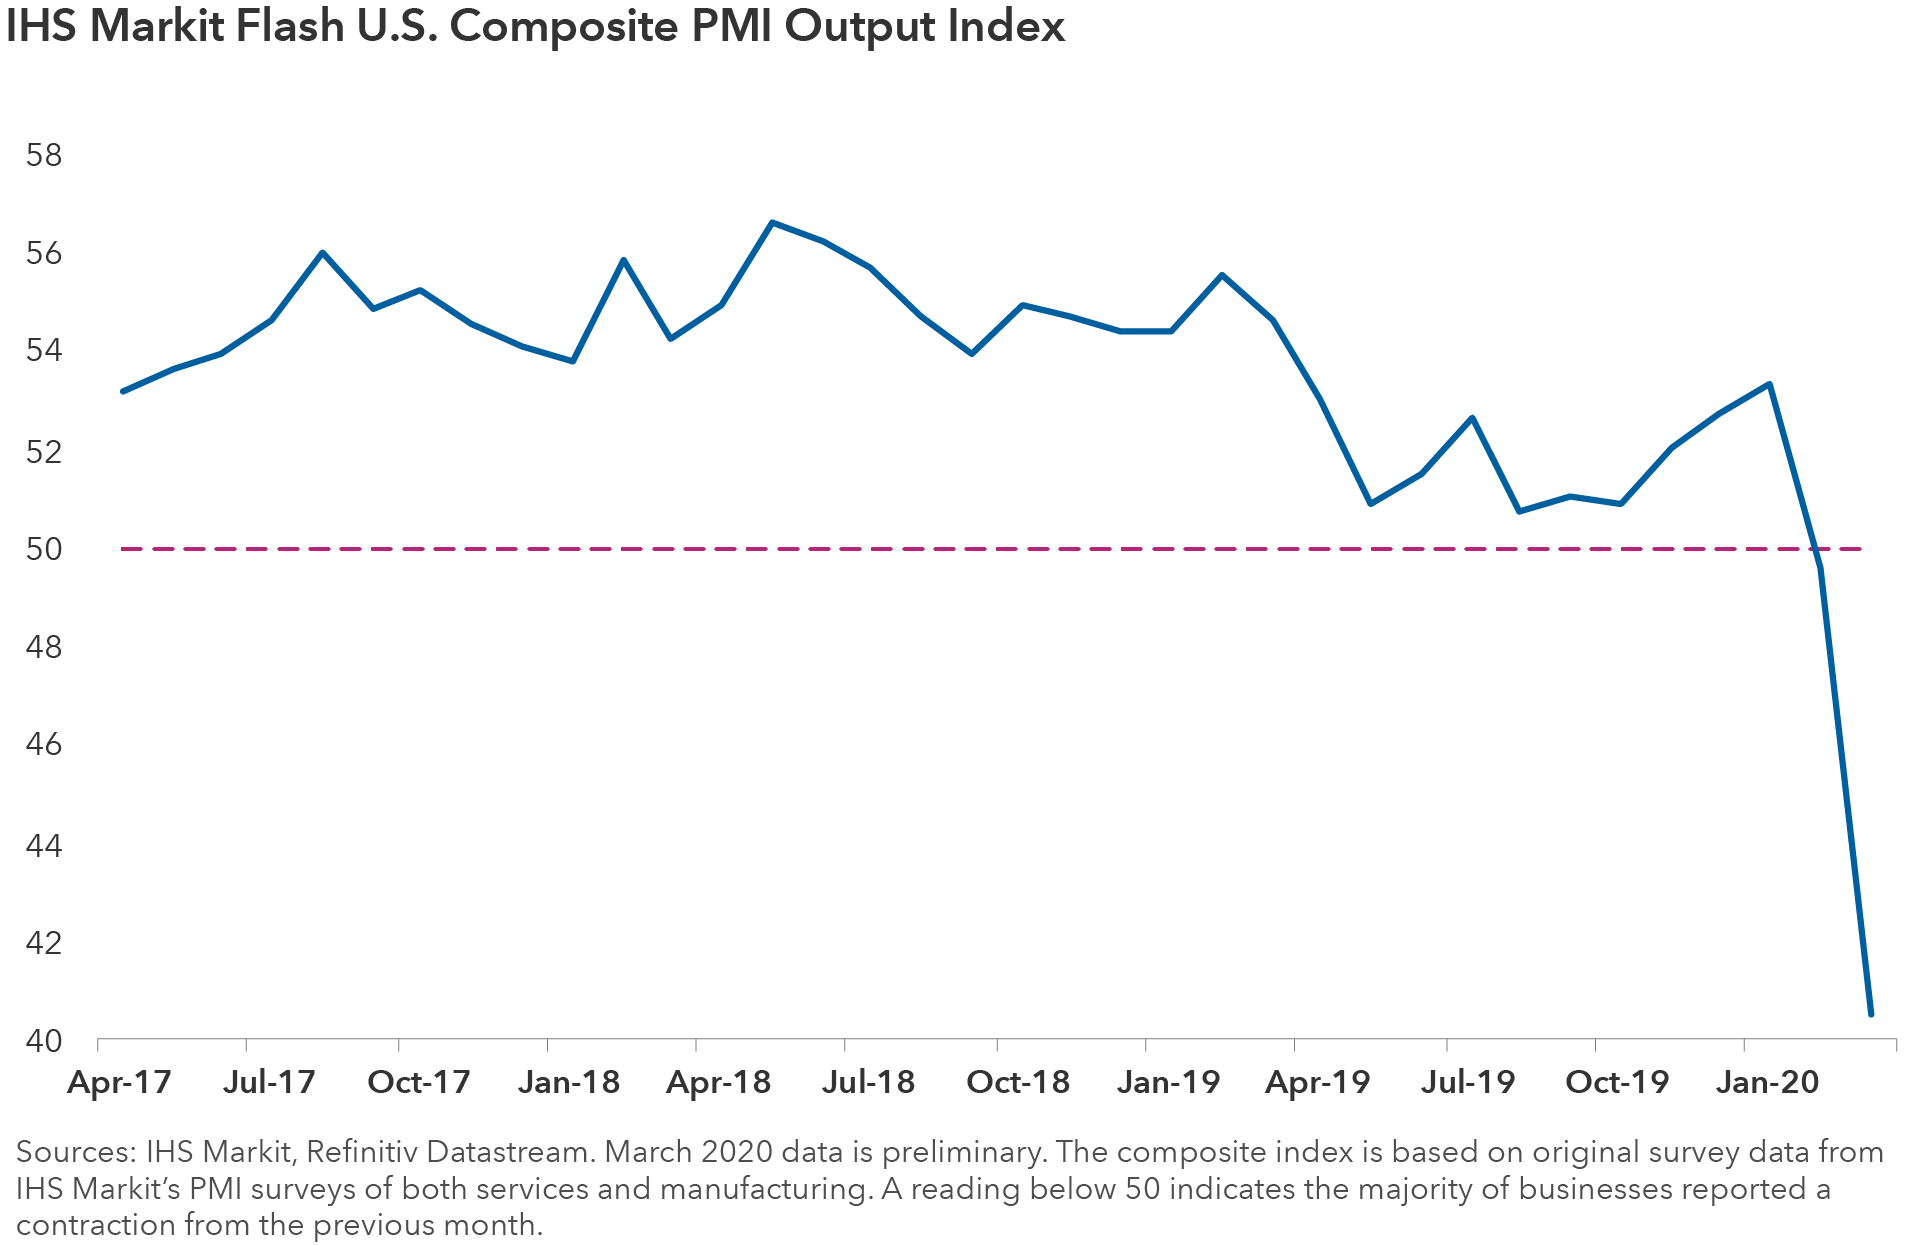 Line chart displays the IHS Markit Flash U.S. Composite PMI Output Index from April 2017 through March 2020. The chart shows a plunge in the latest month to 40.5. Readings below 50 indicate economic contraction. All data since April 2017 are above 50 except for a reading of 49.6 in February 2020.